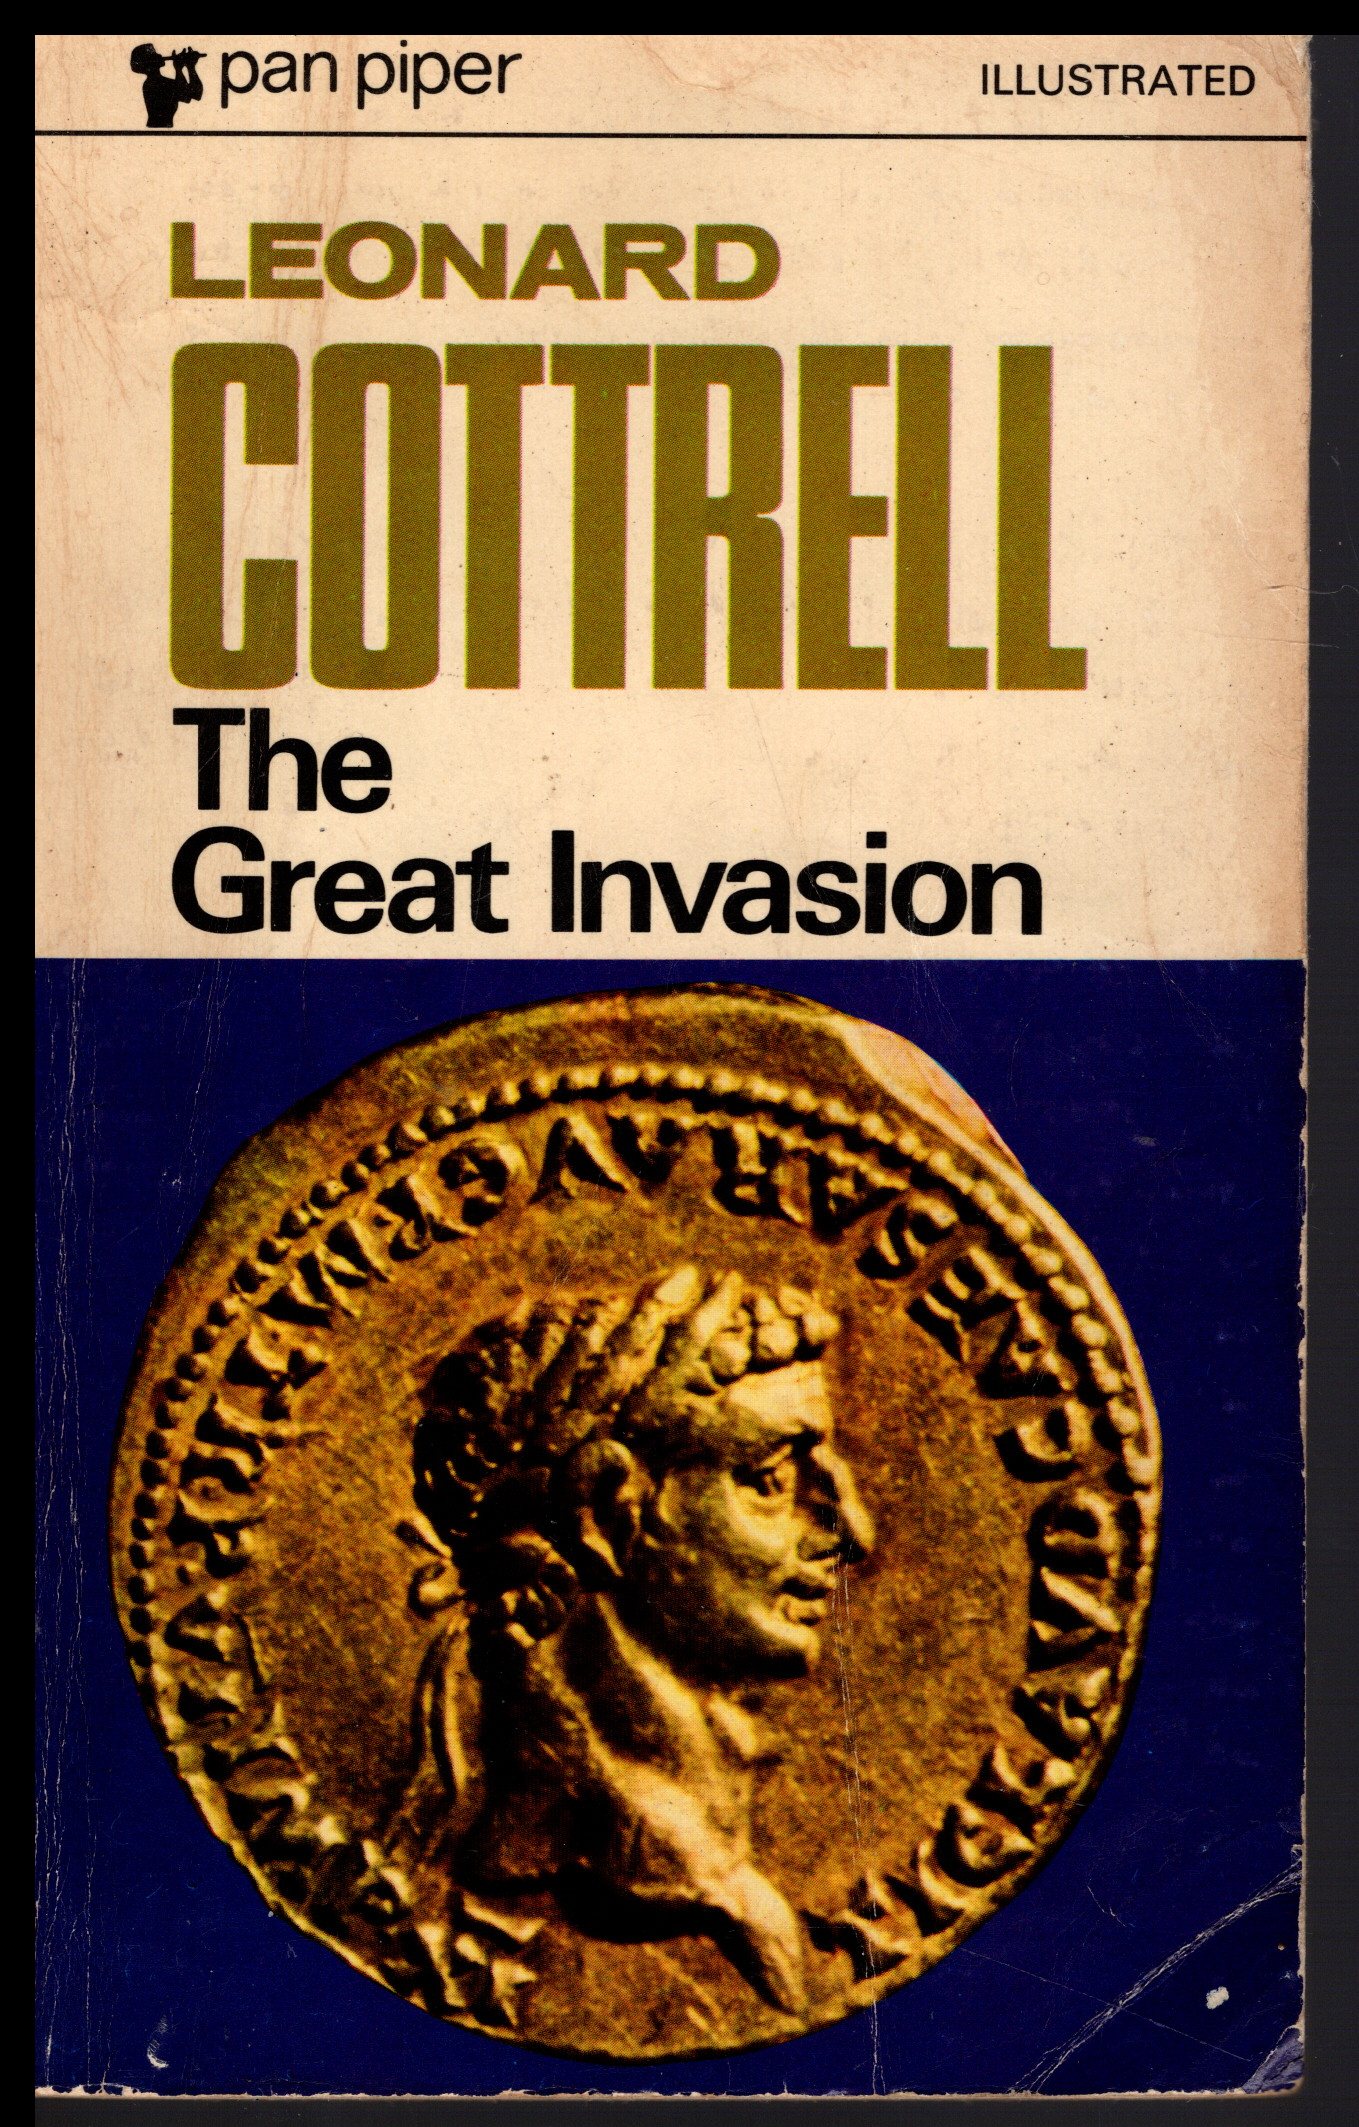 The Great Invasion by Leonard Cottrell 1969 A Pan Piper Illustrated Book - Cottrell, Leonard